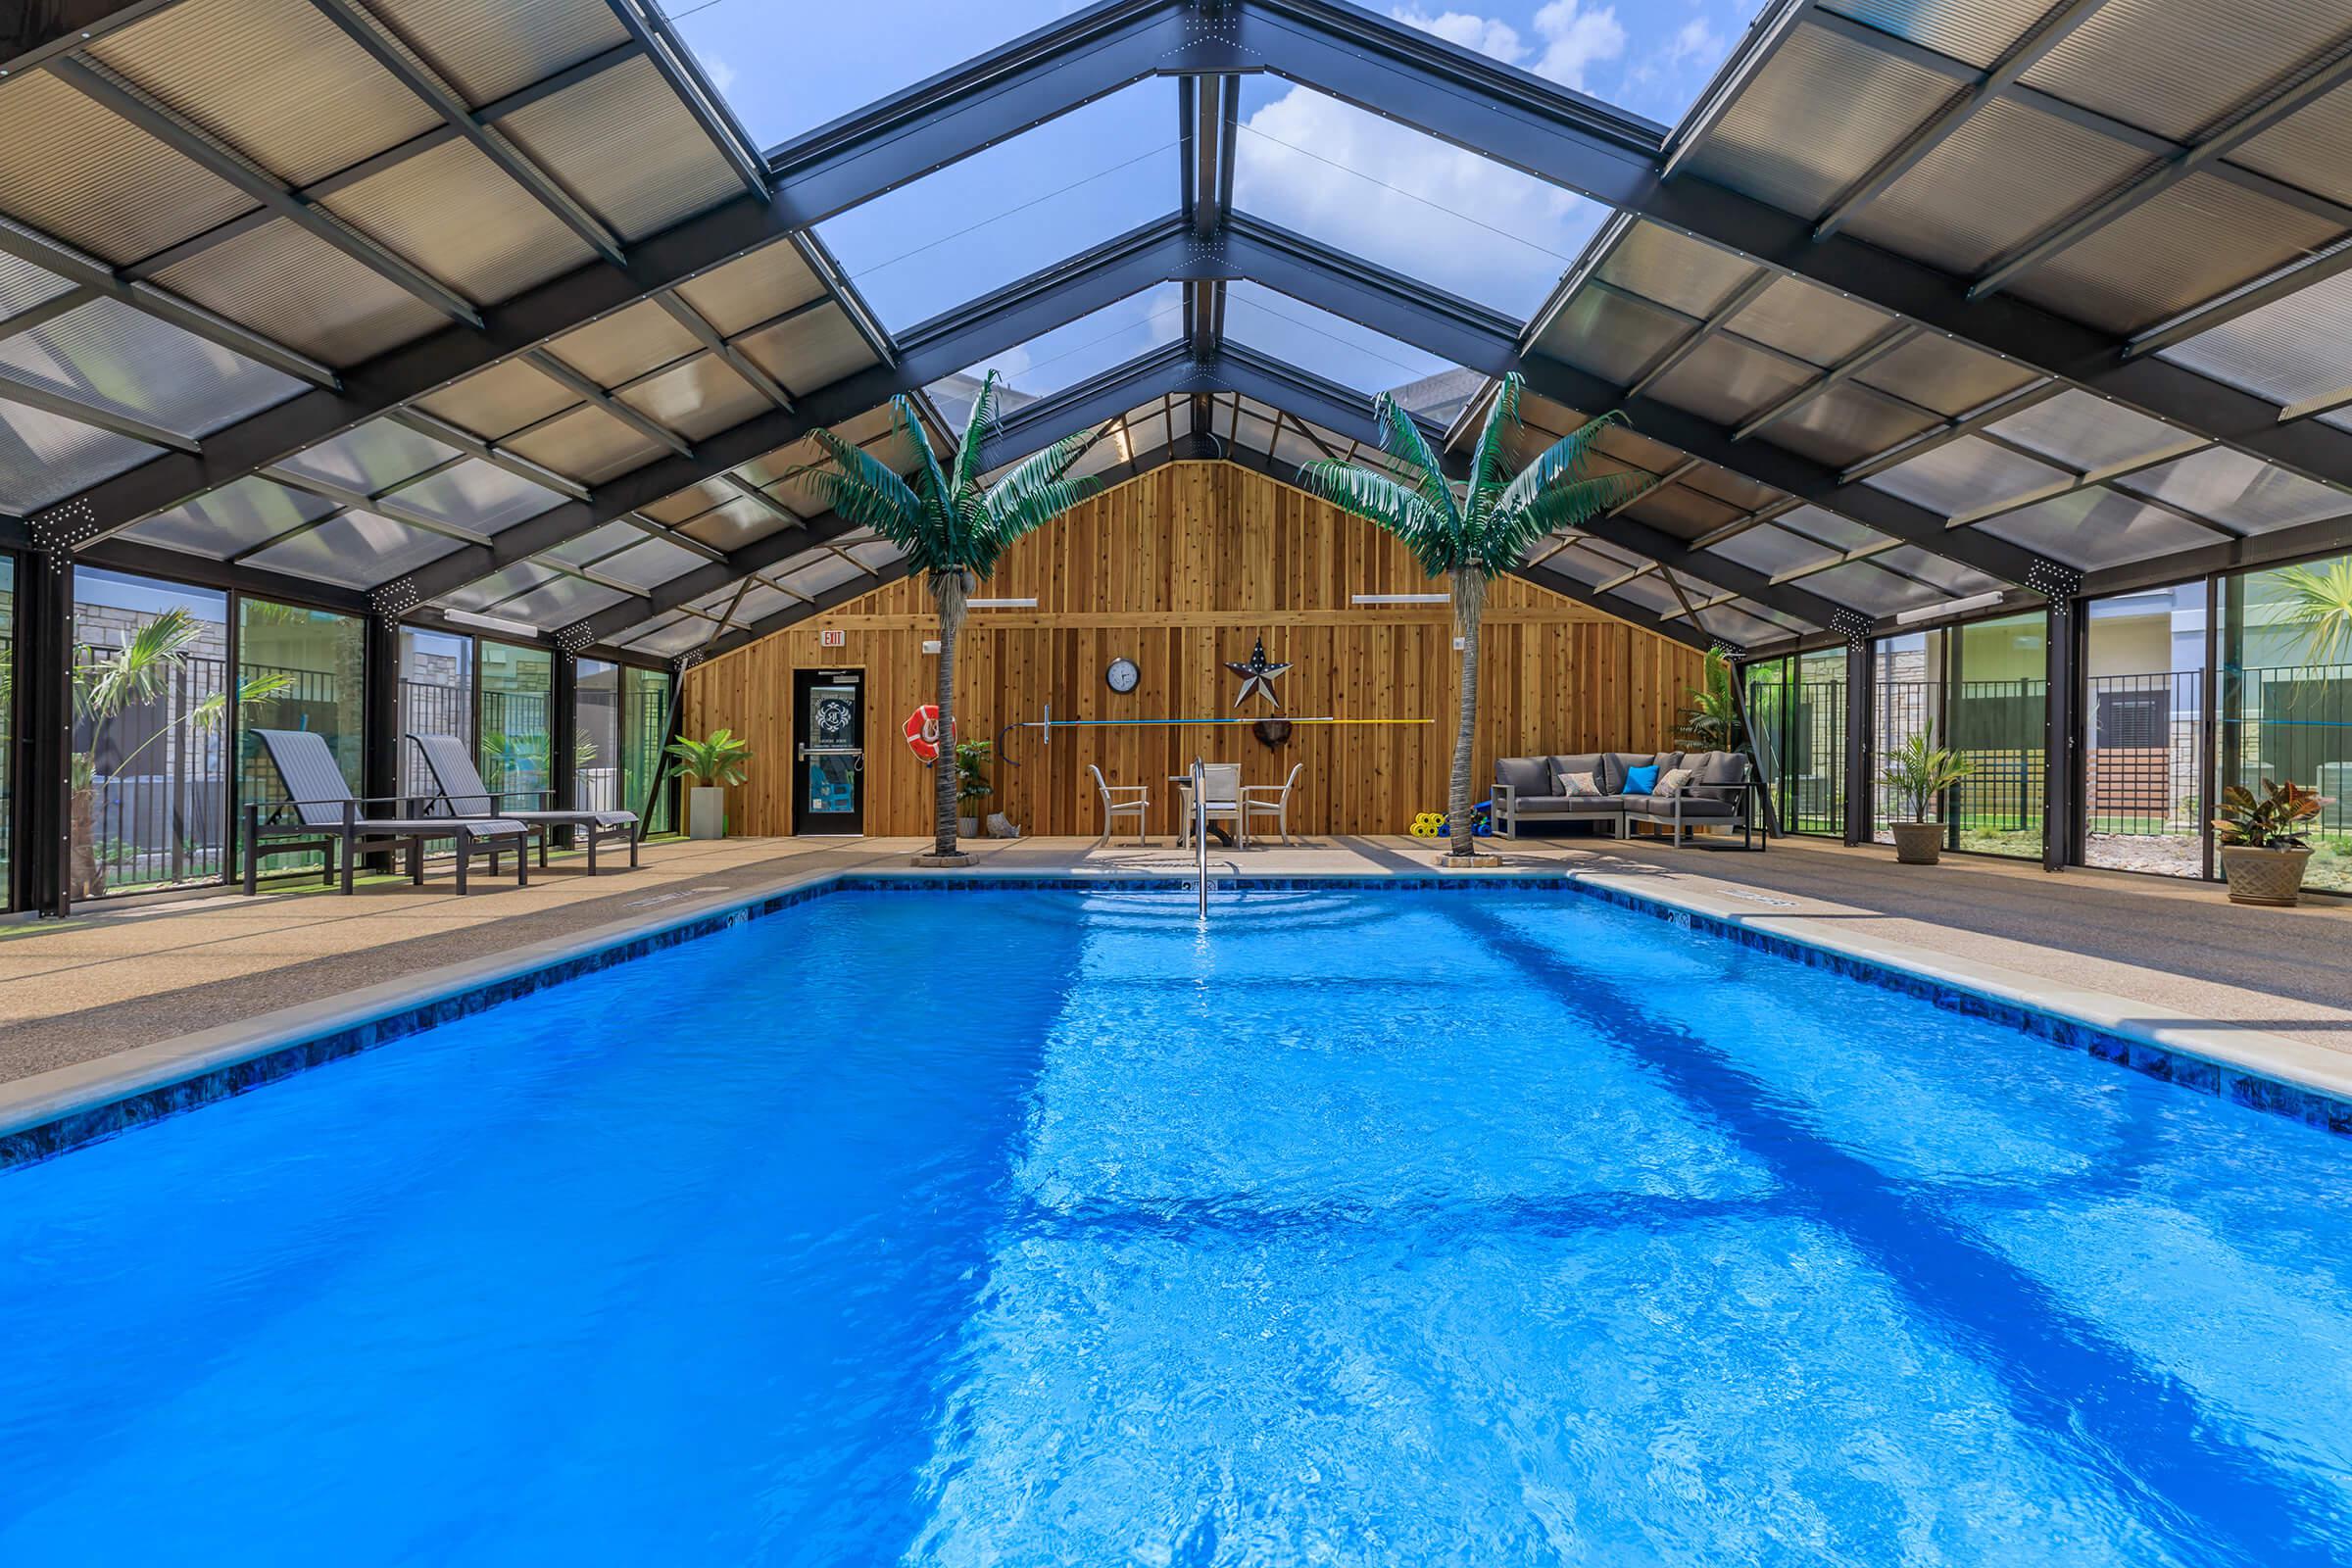 DISCOVER THE INDOOR HEATED SWIMMING POOL IN GRAND PRAIRIE, TEXAS